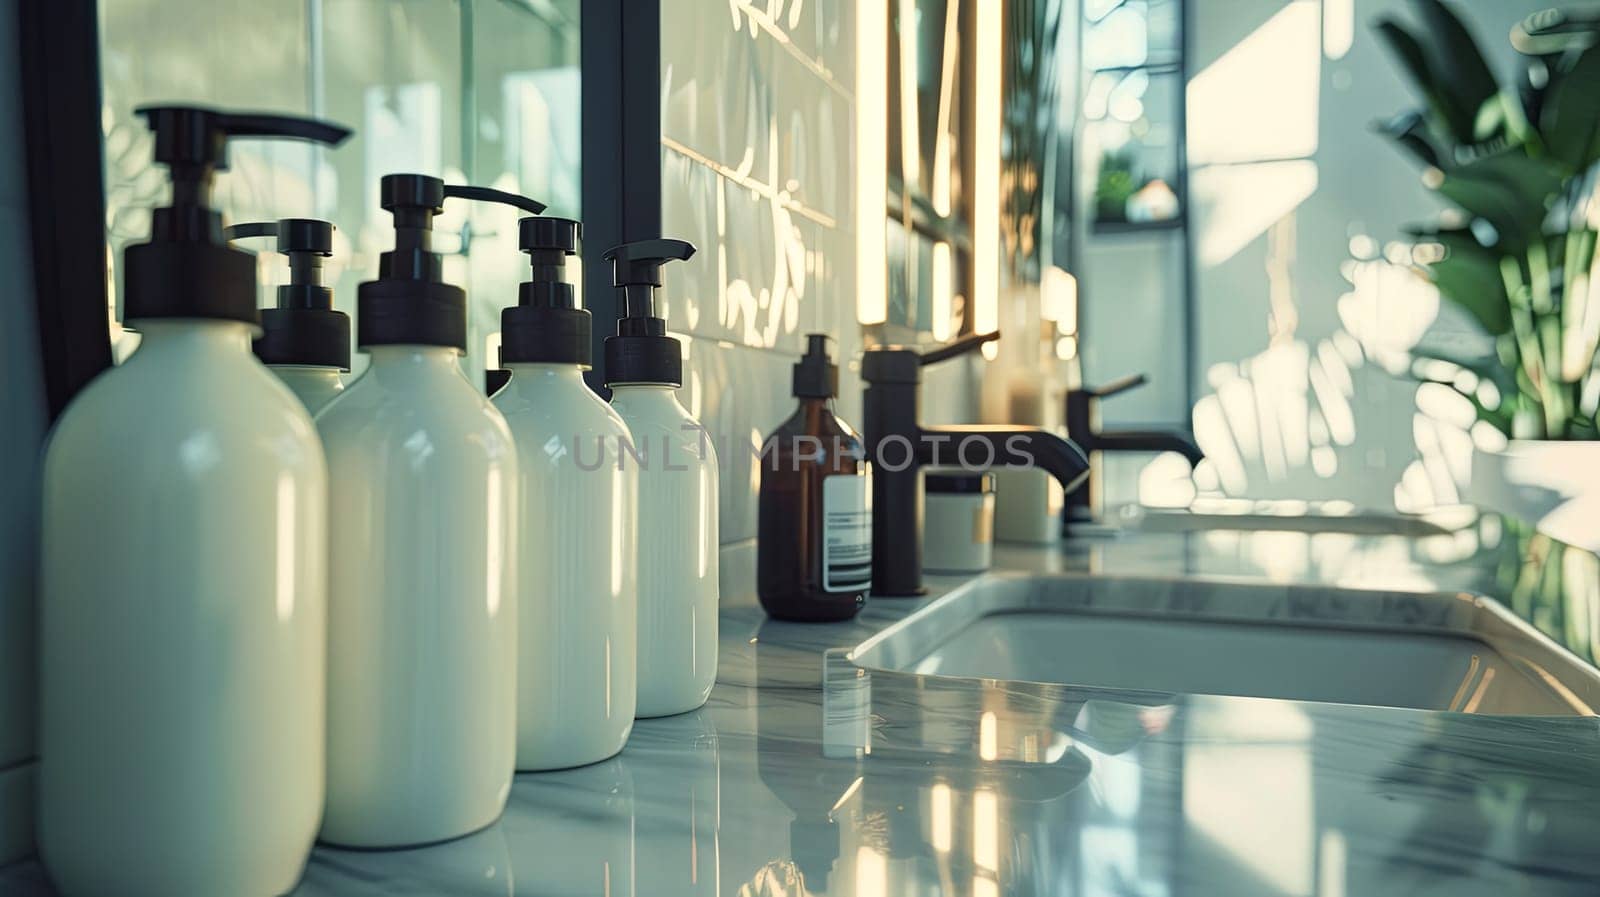 Luxurious, clean bottles of shampoo and conditioner in a bathroom setting.